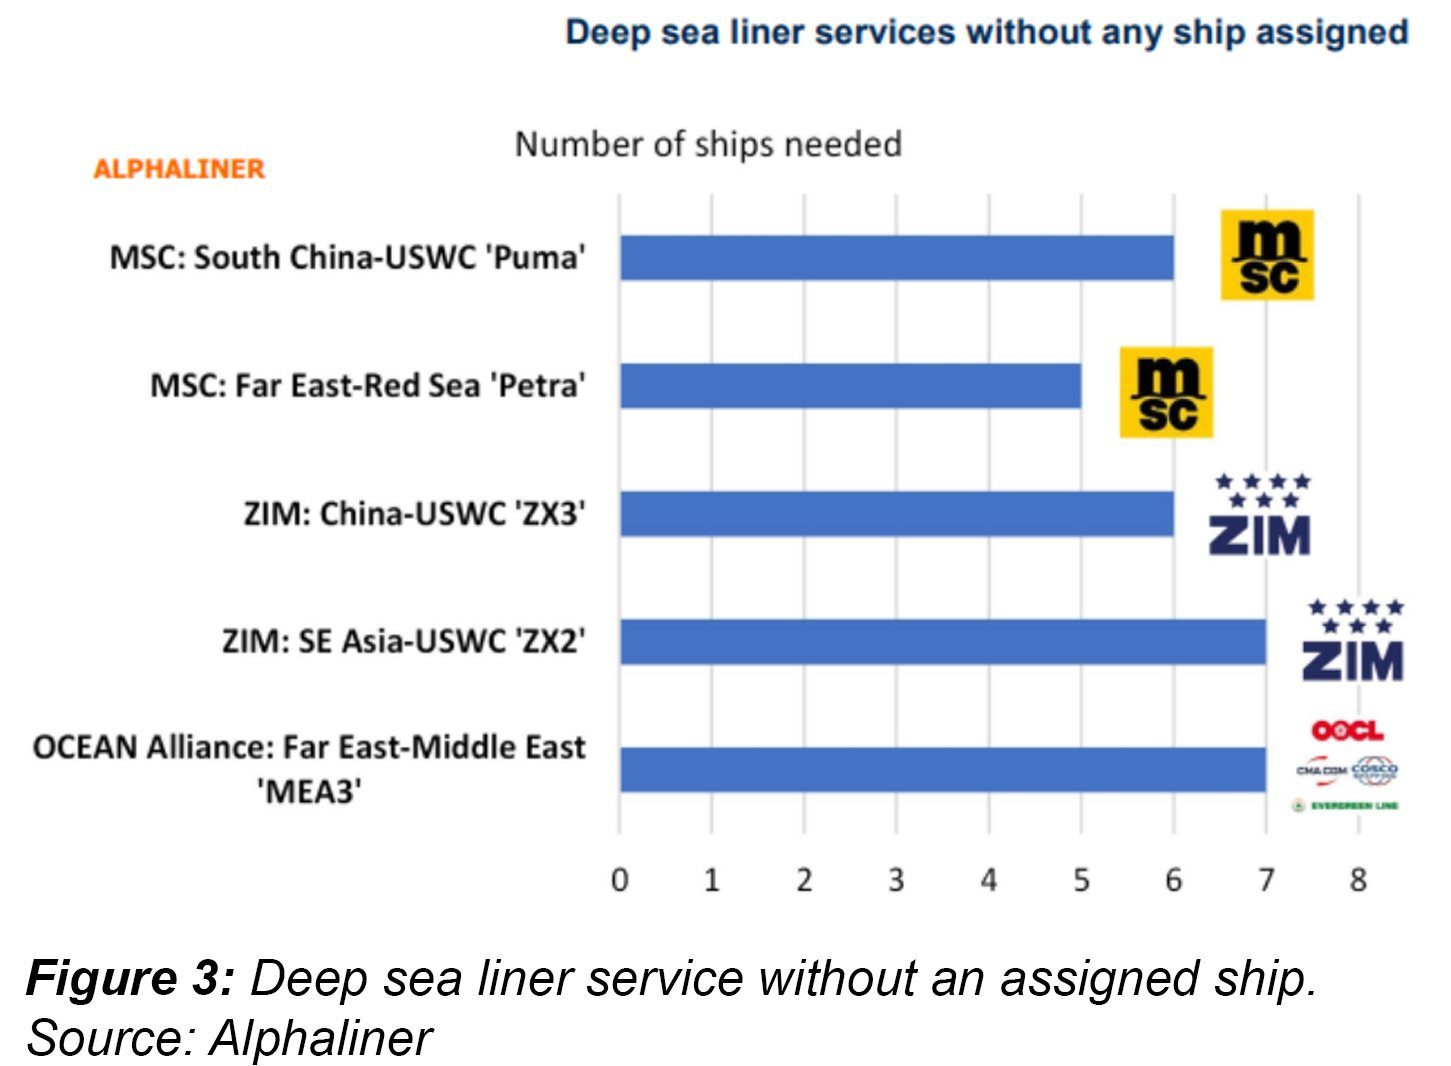 shipcomonthly_7-deep-sea-liner-service-fs-1-.png